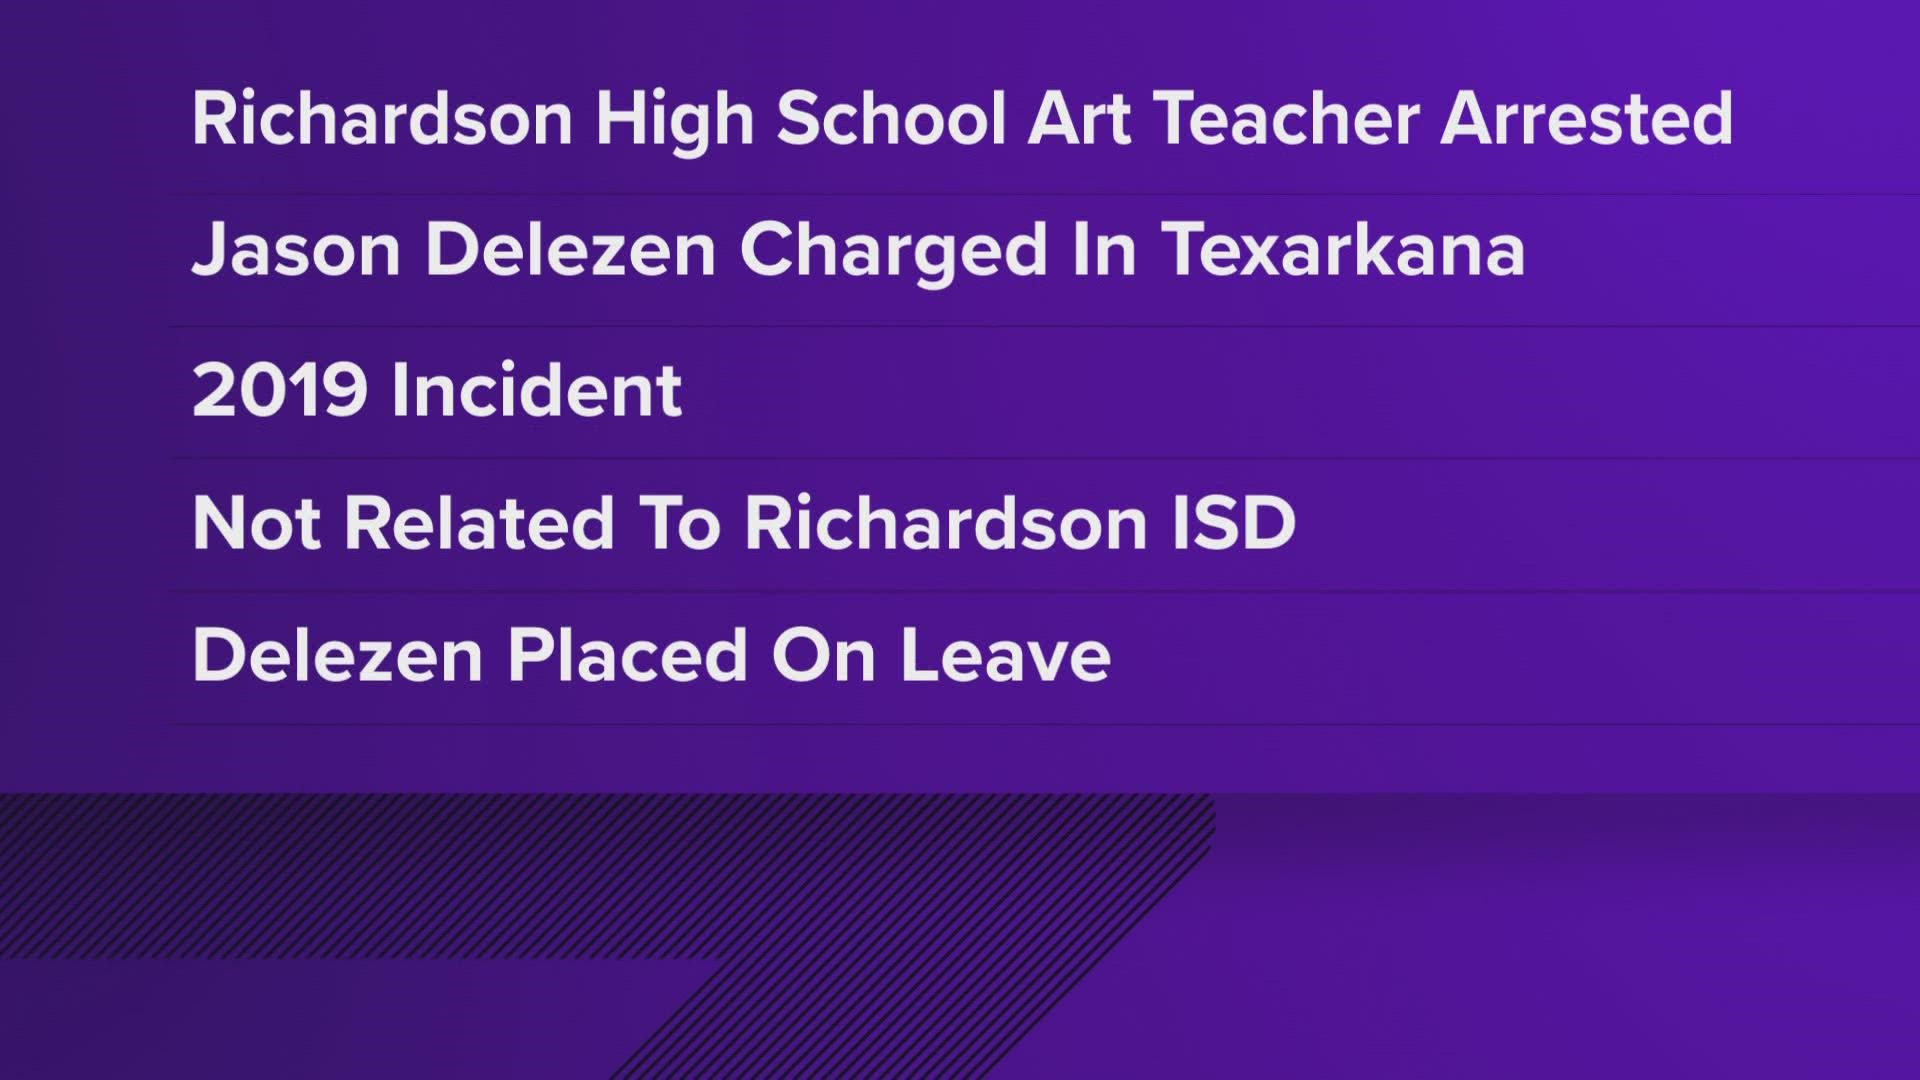 RISD said Delezen's arrest was not related to Richardson High School or any RISD student.